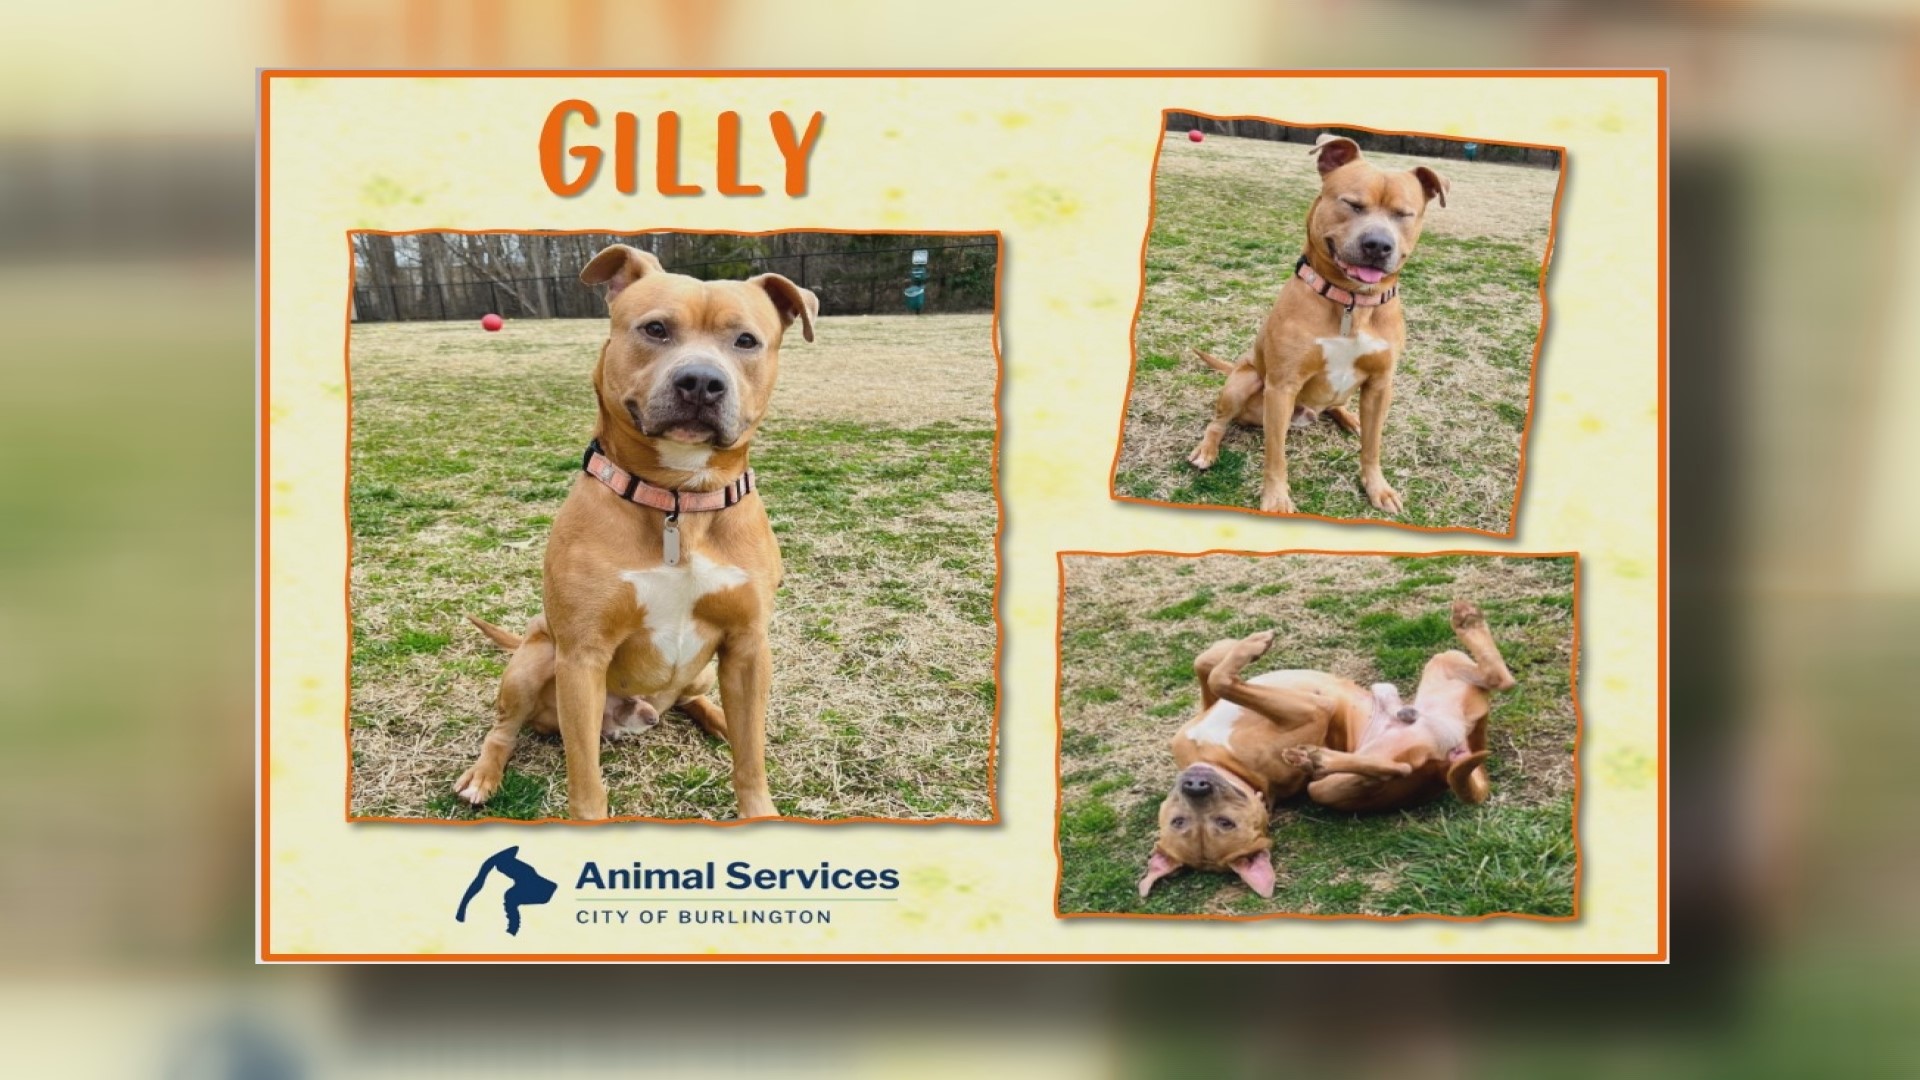 Let’s get Gilly adopted!